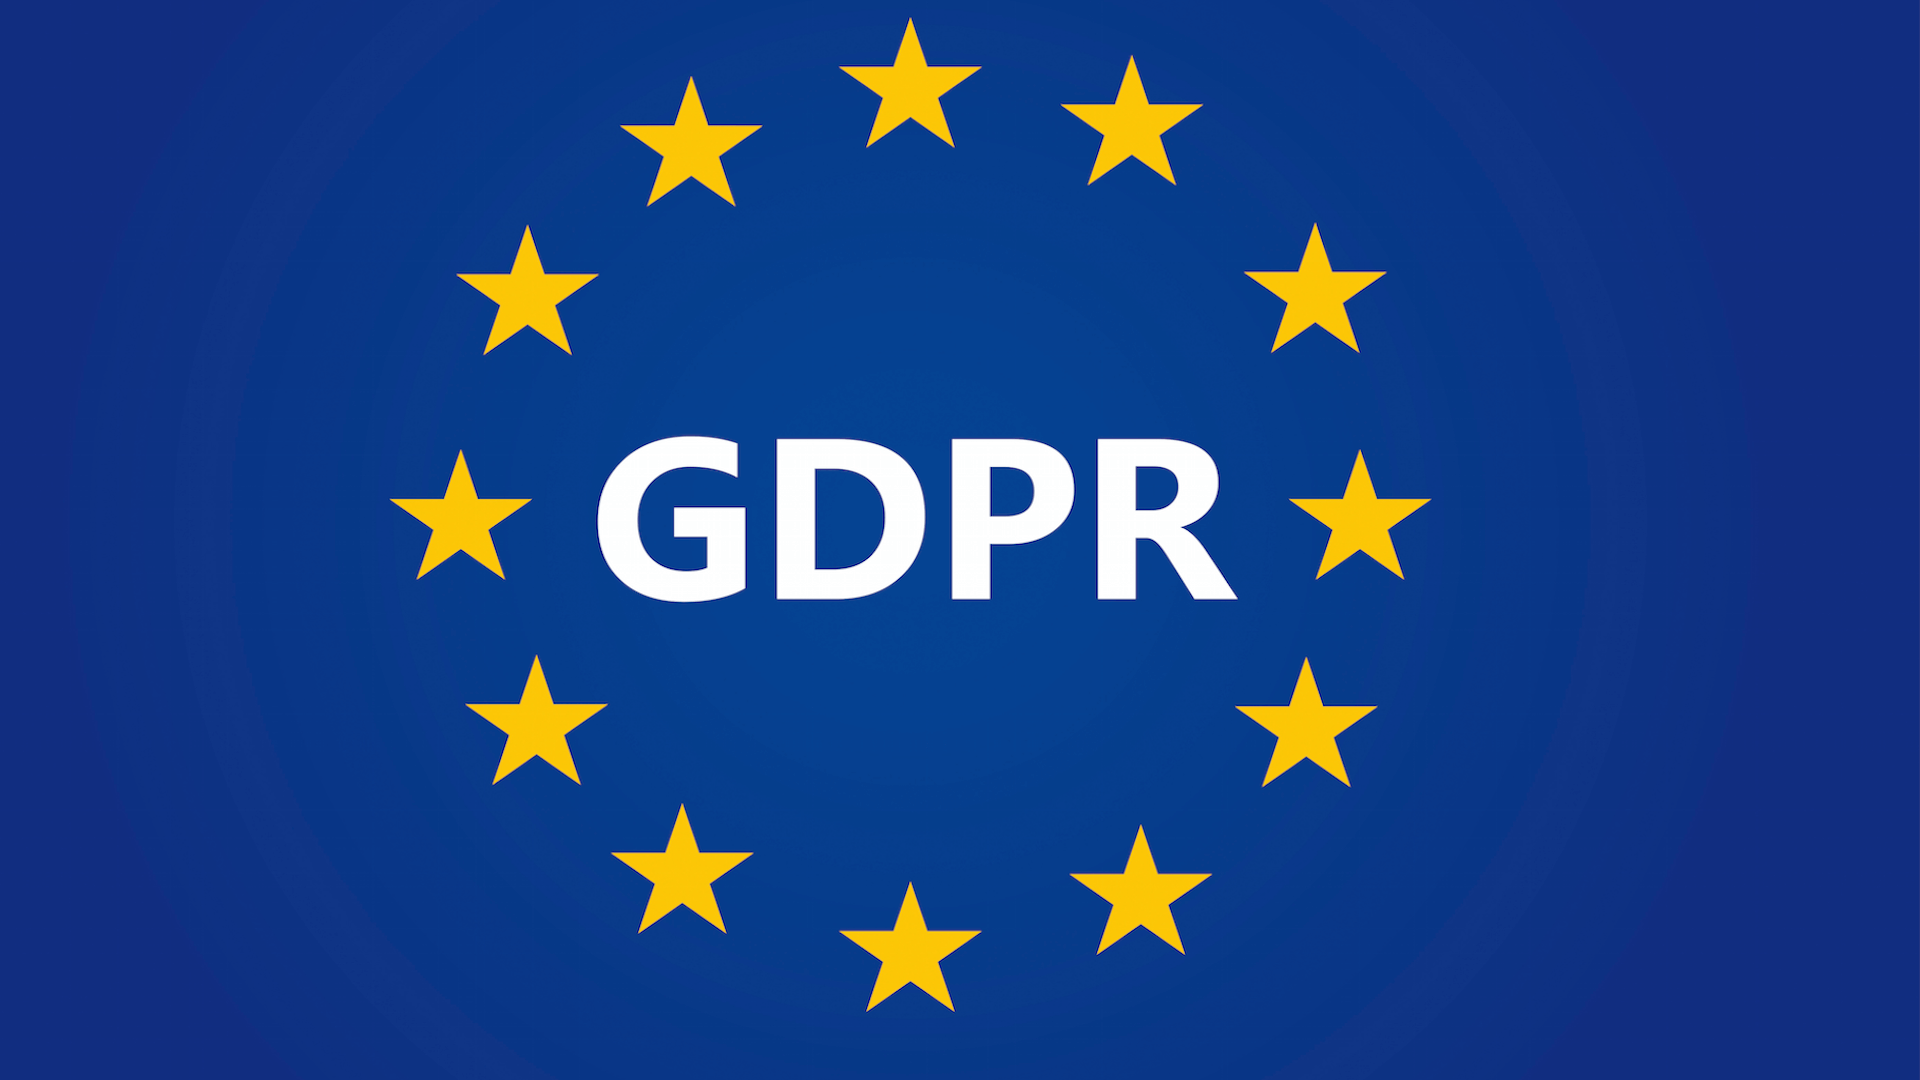 All About General Data Protection Regulation (GDPR)